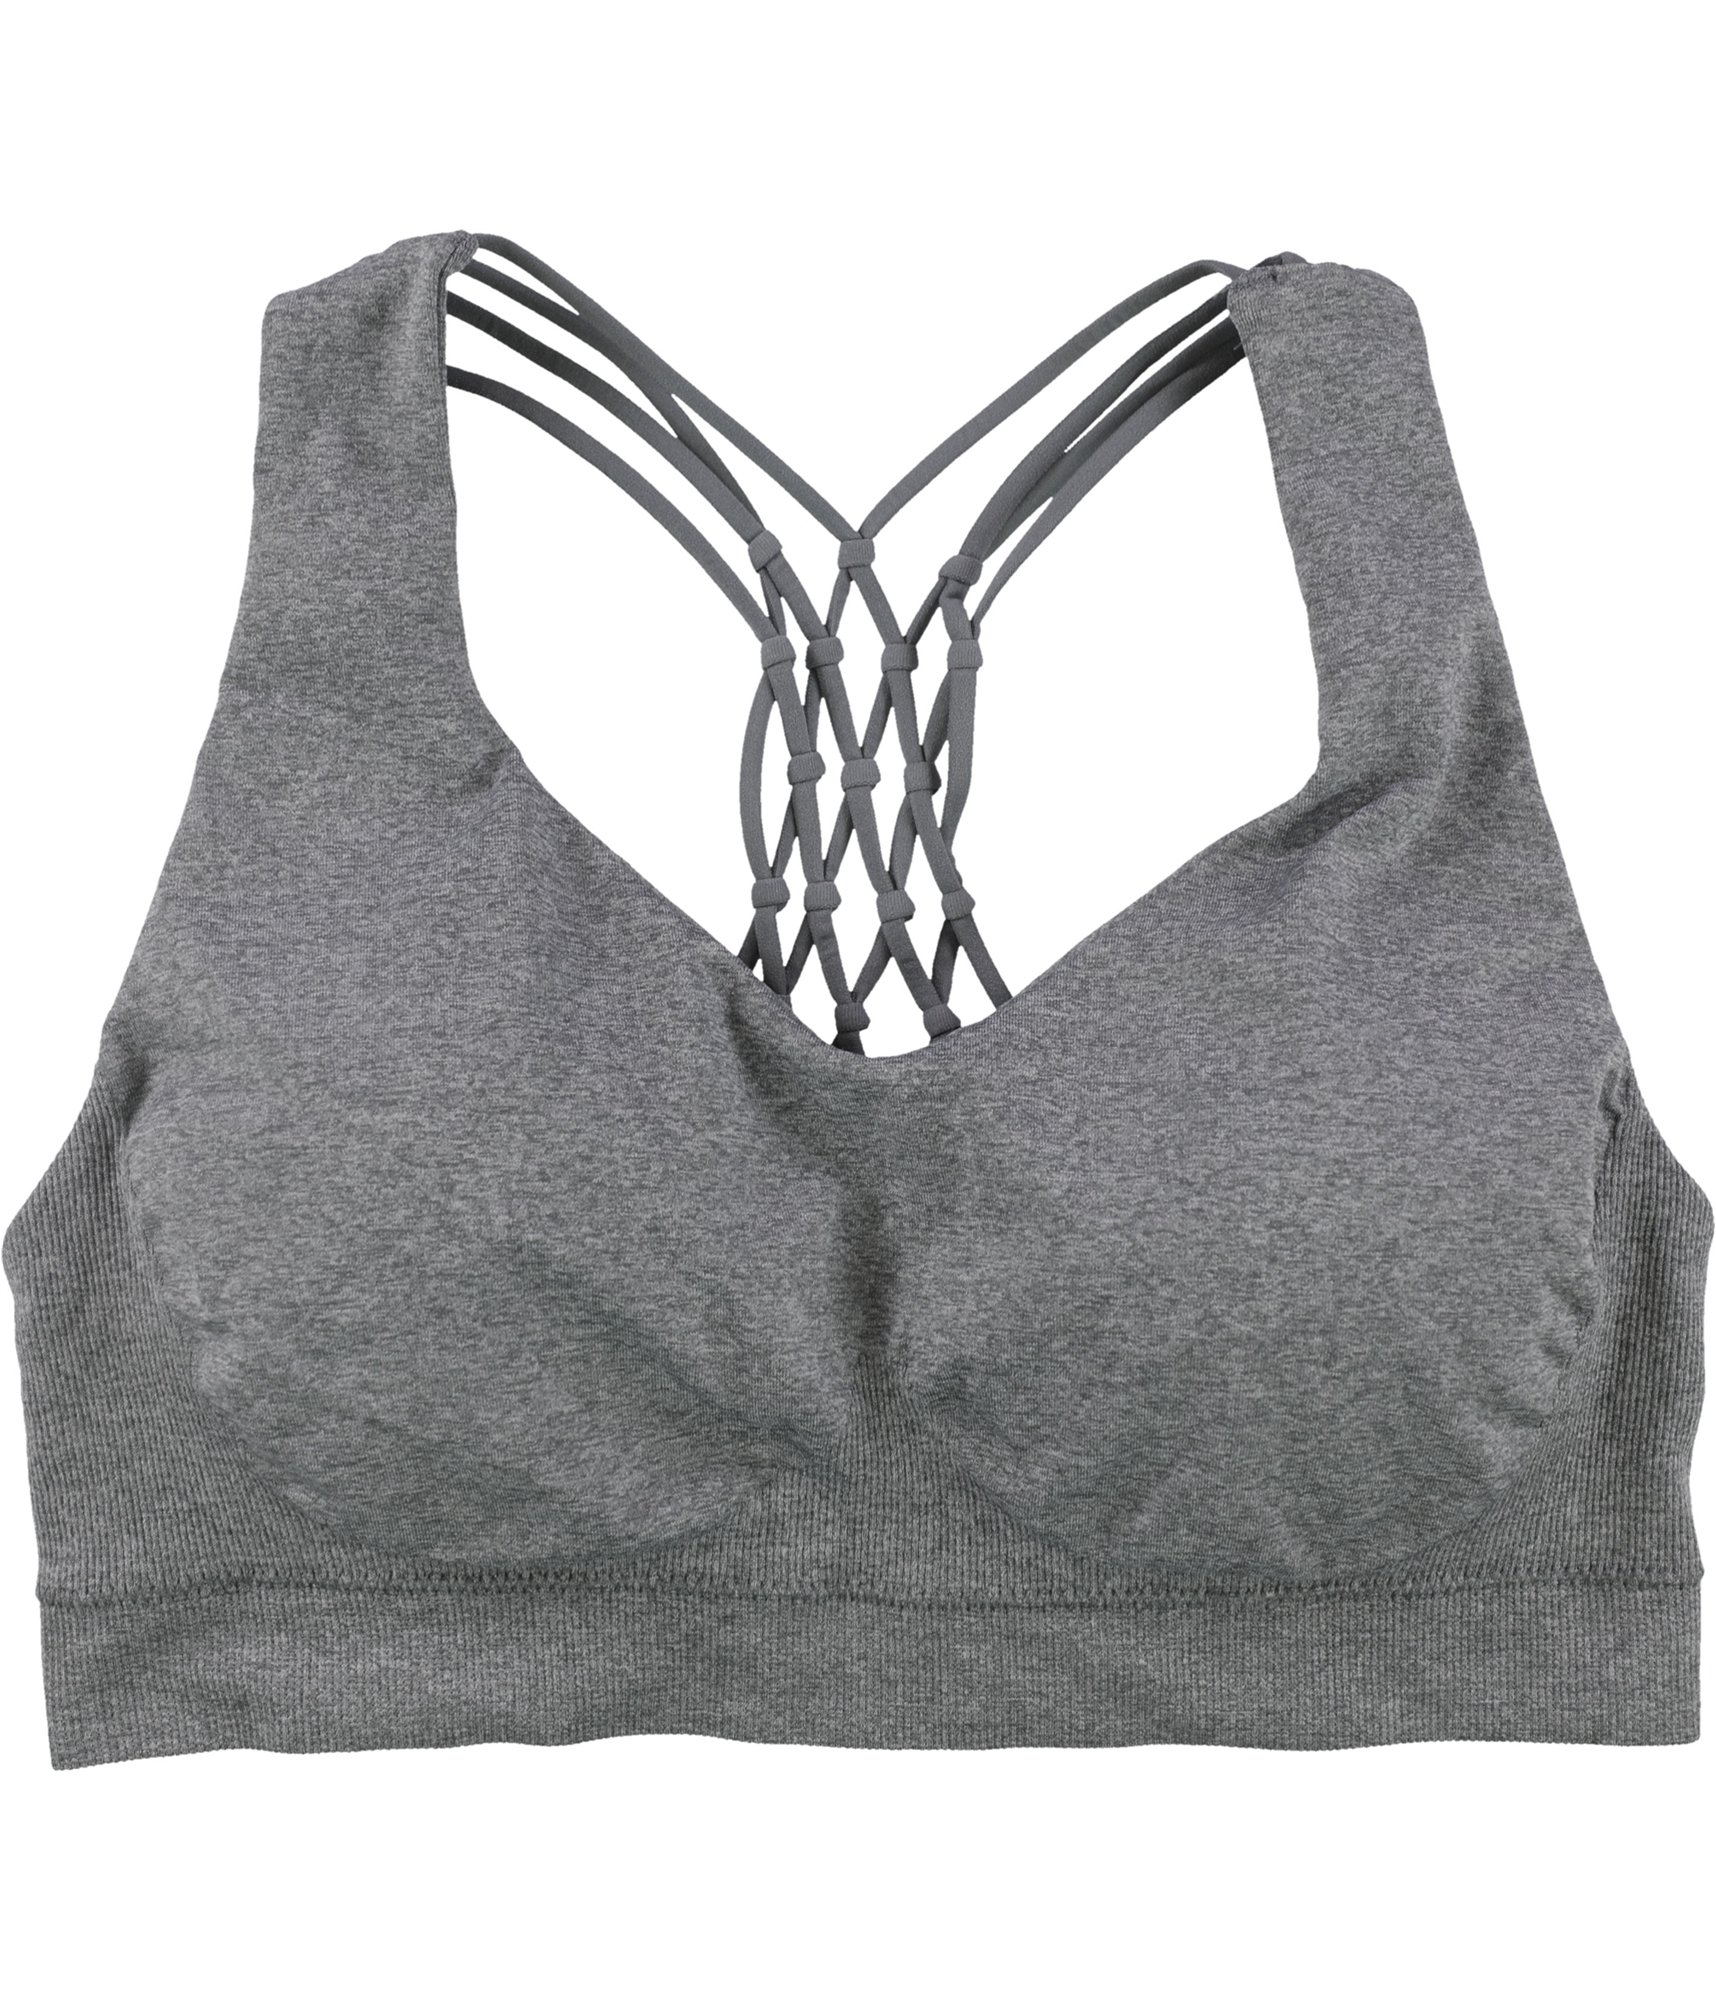 1To Finity Women's Sports Bras High Impact Strappy Padded seamless  removable pad Bra Cross Back hock closure sports bra for Workout Activewear  Bra